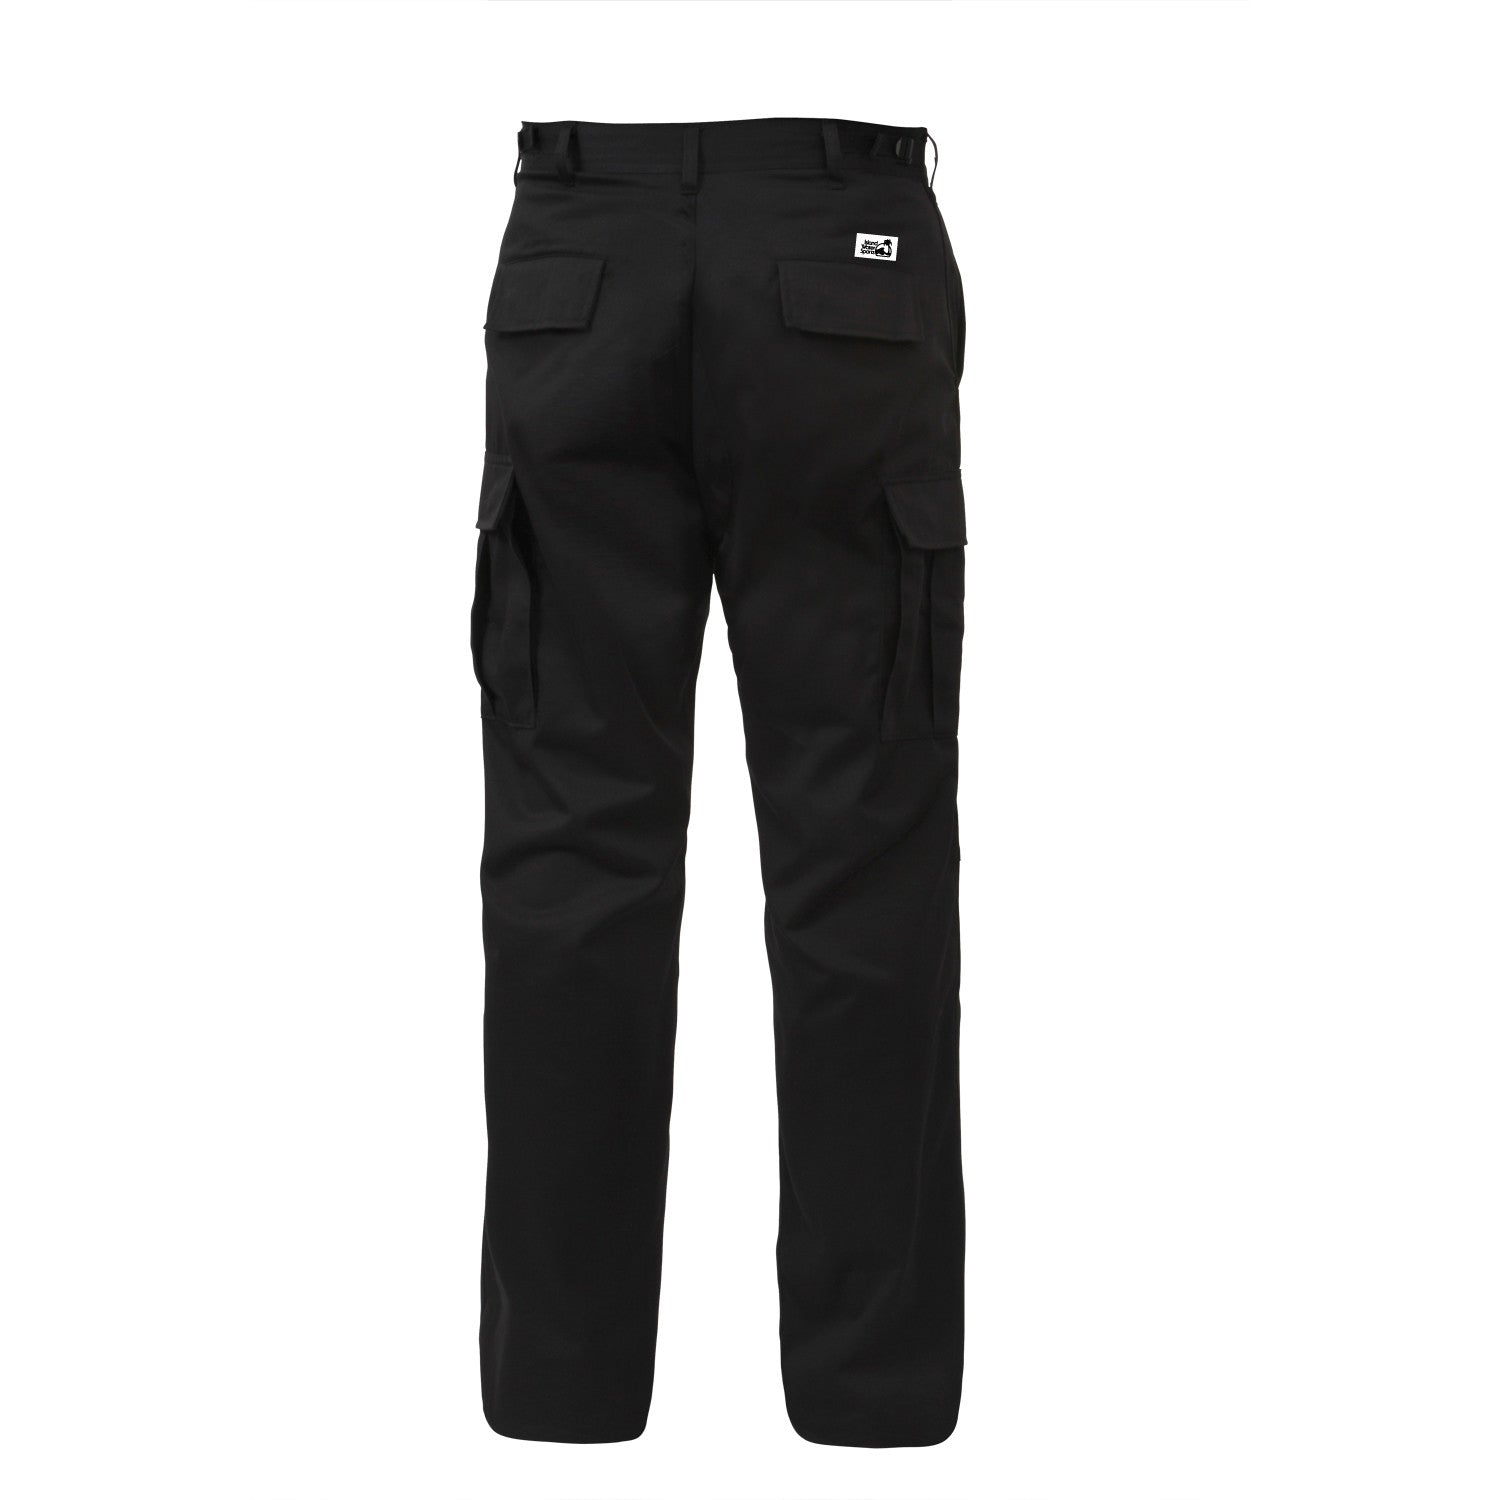 Rothco Relaxed Fit Zipper Fly BDU Pants Black XS